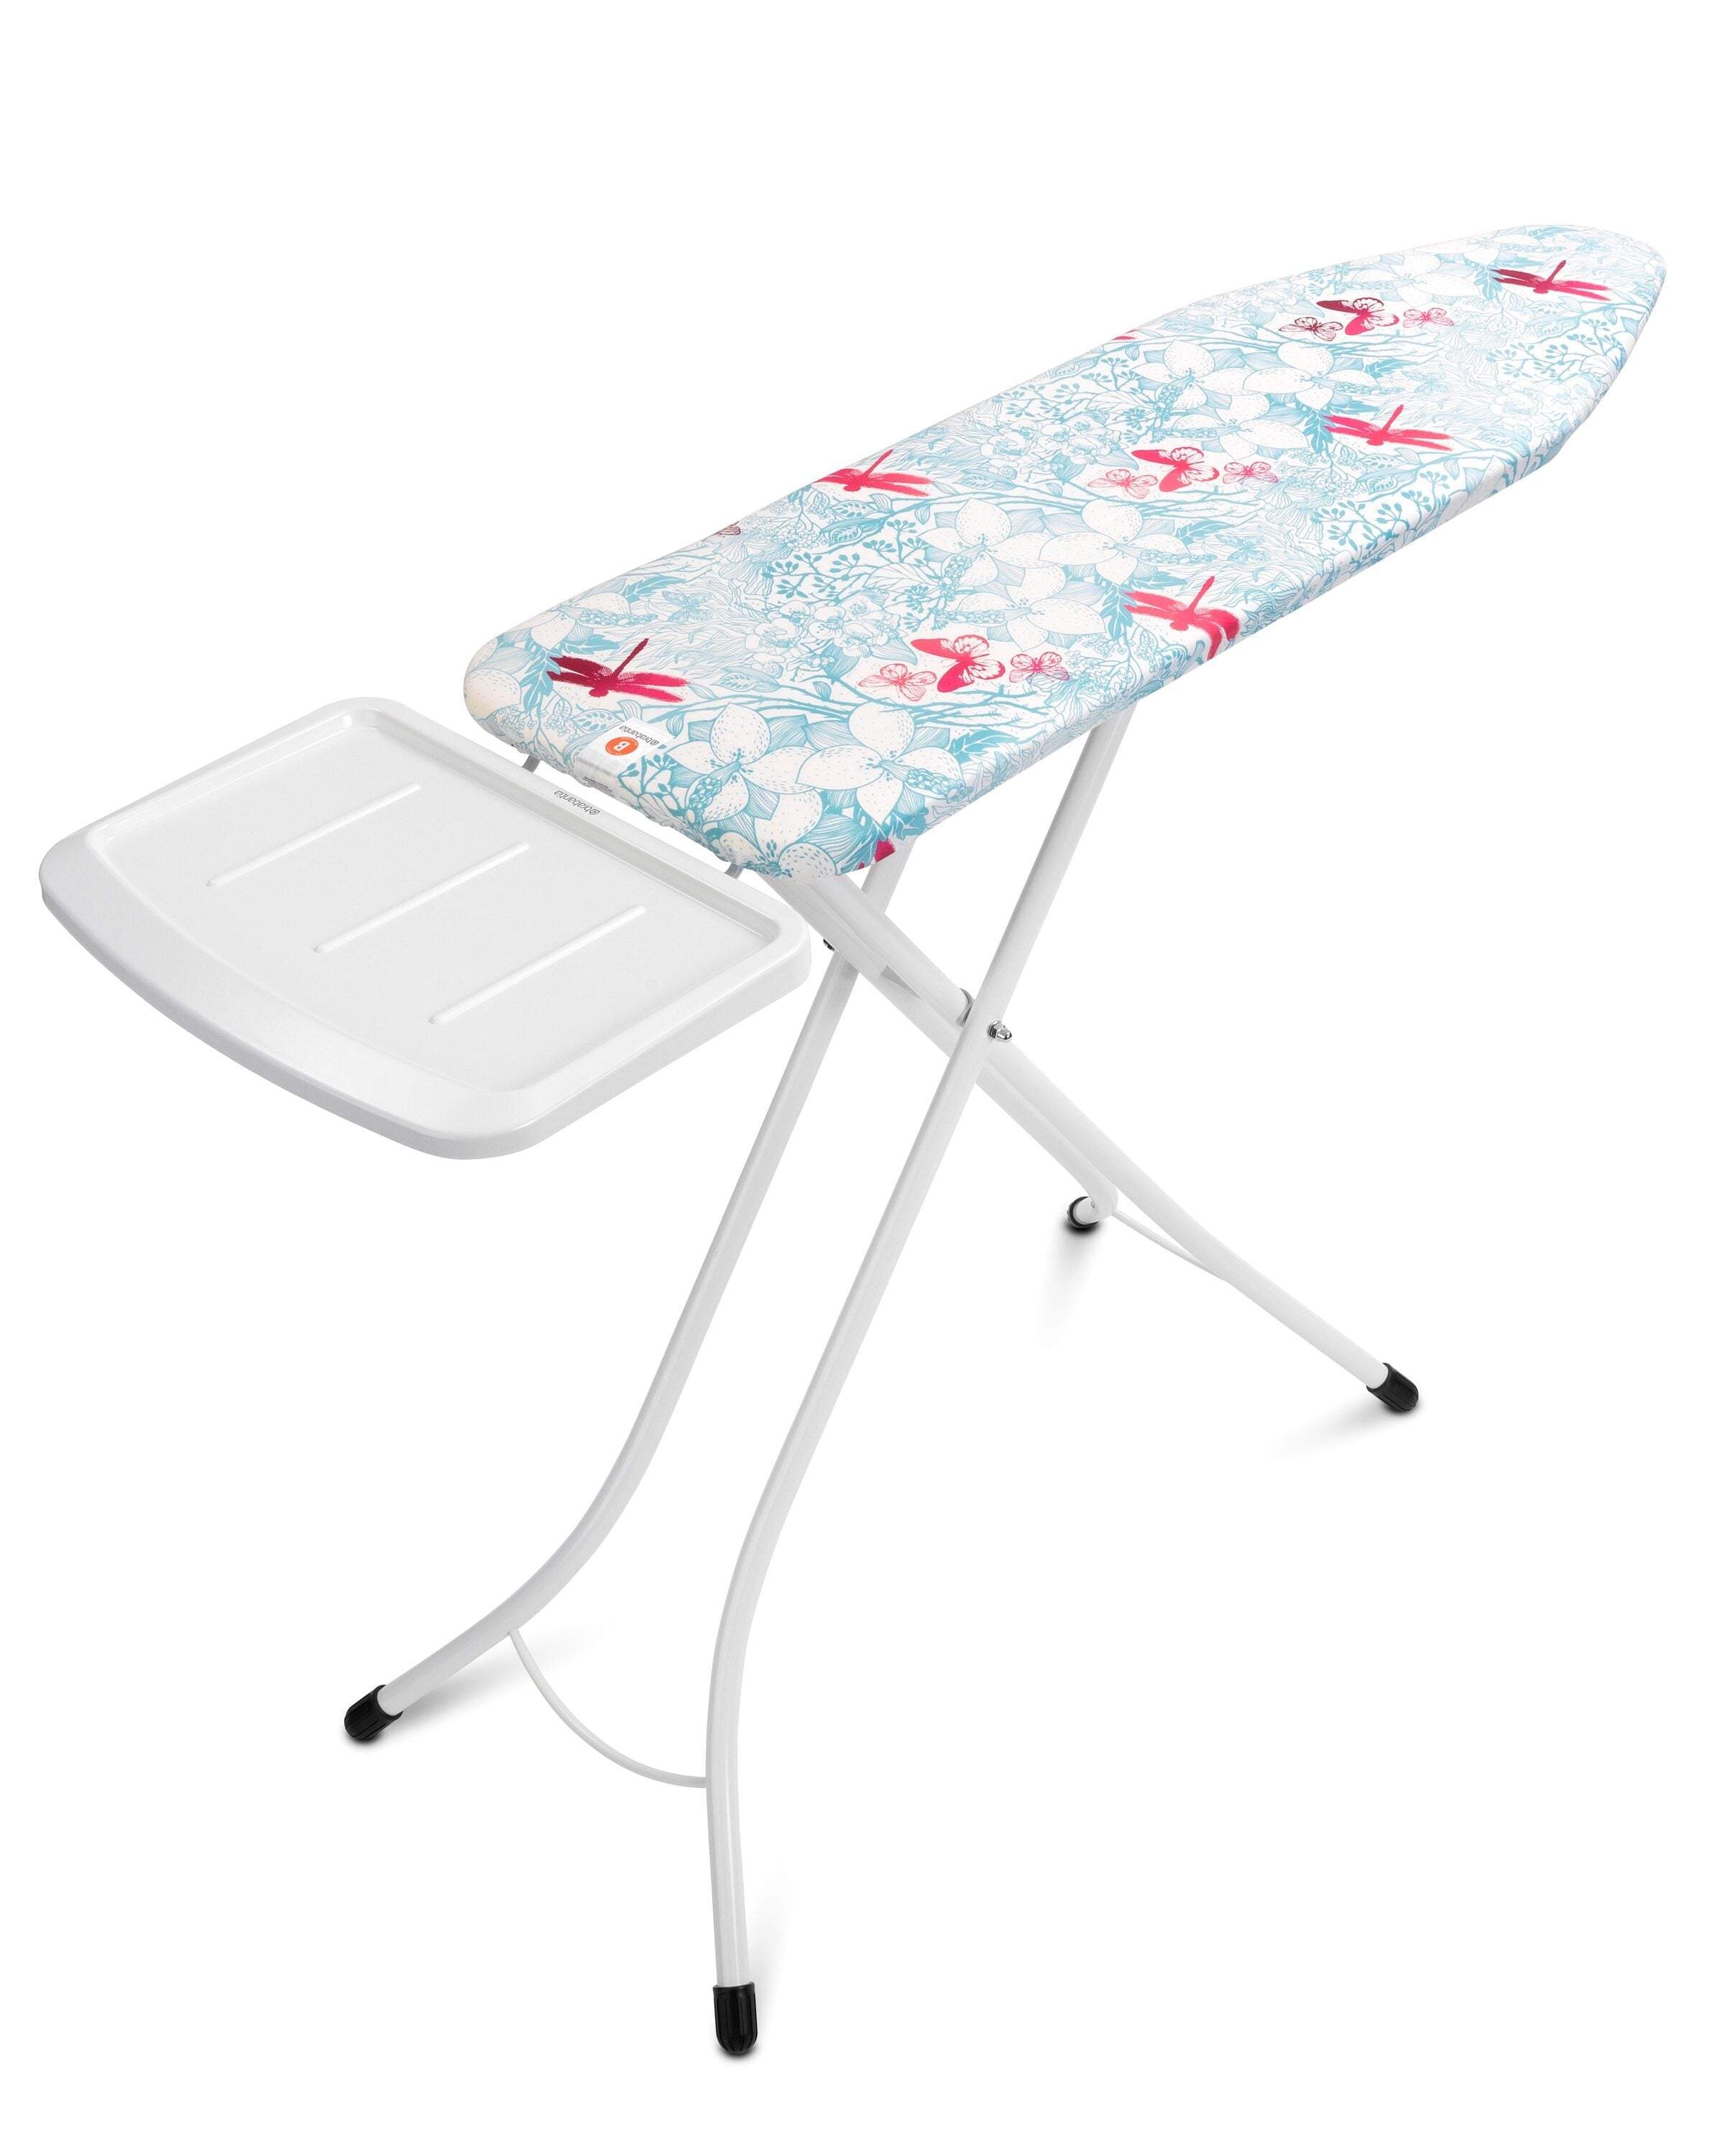 Dropship 1pc Household Ironing Mat Folding Sponge Insulation Cloth Ironing  Board Clothes Ironing Board Portable Ironing Board to Sell Online at a  Lower Price